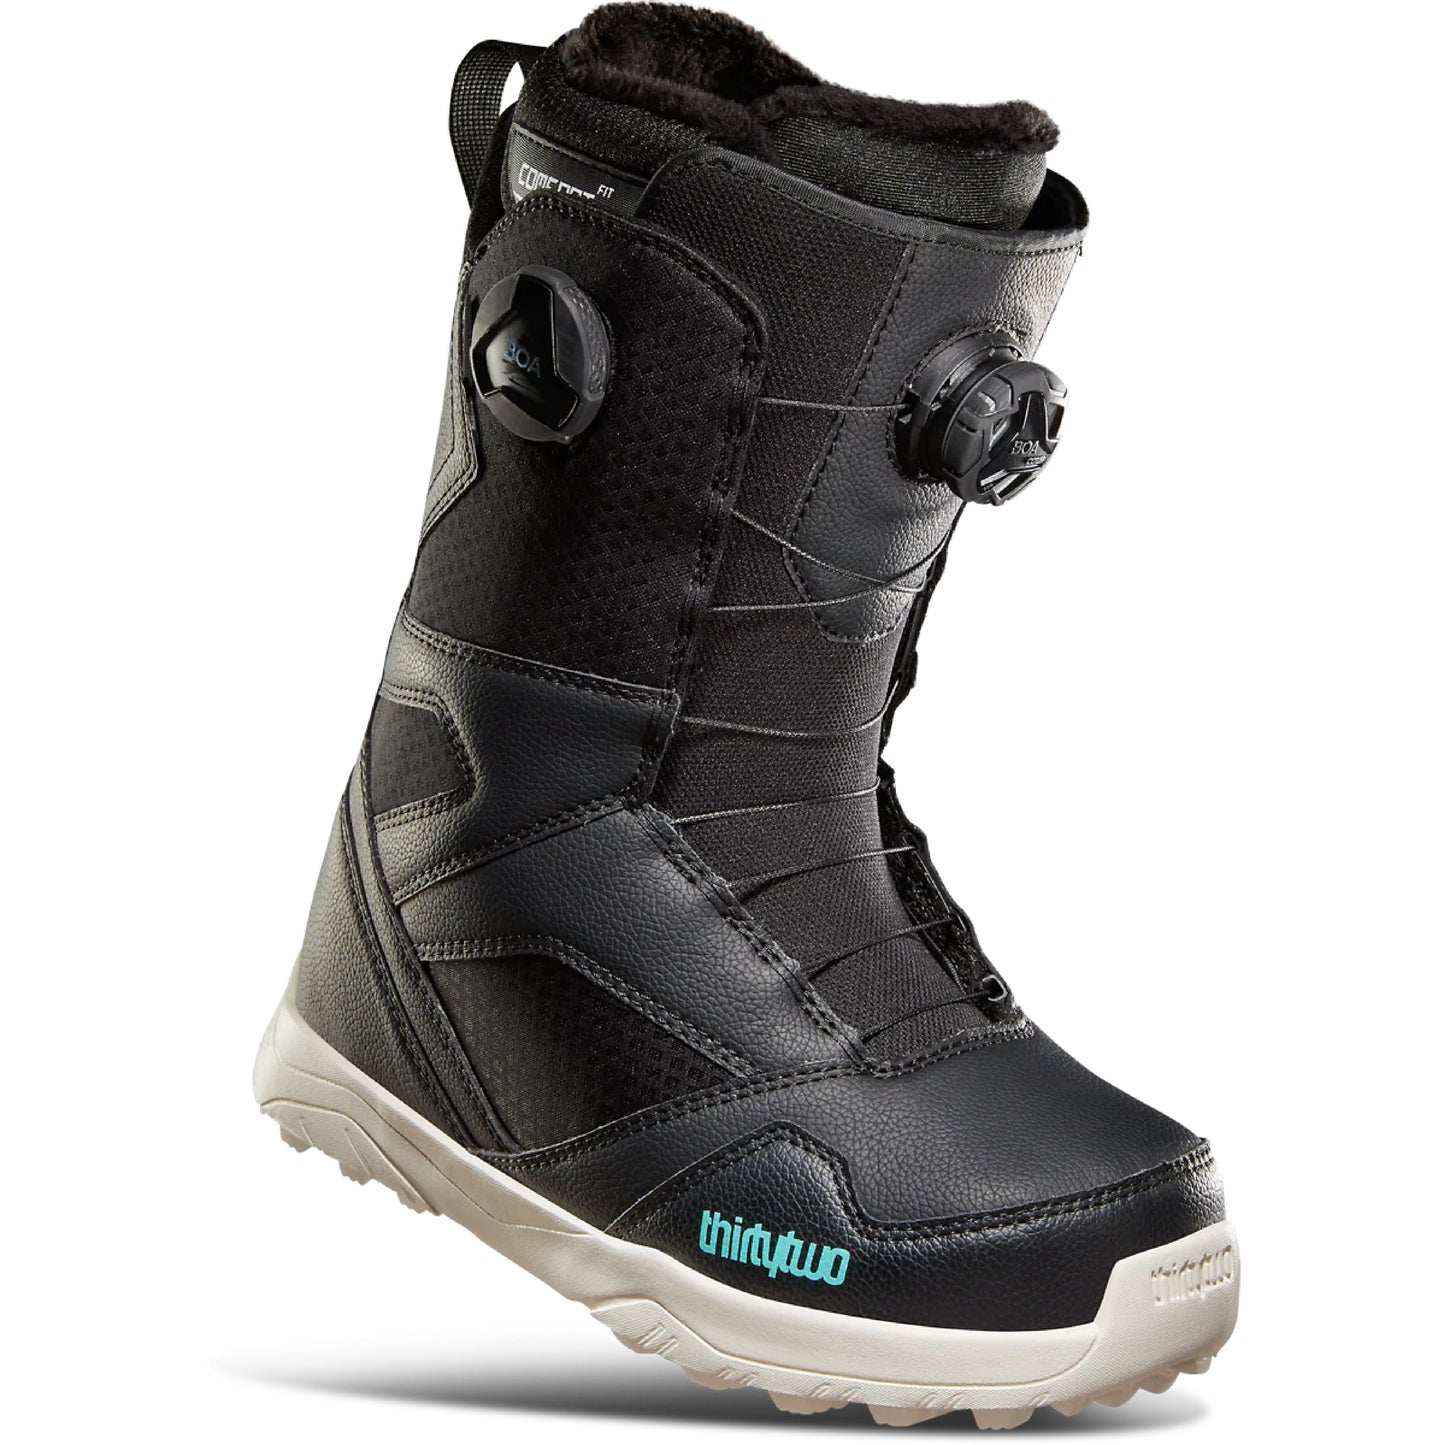 ThirtyTwo Women's STW Double BOA Snowboard Boots - OpenBox Black Snowboard Boots